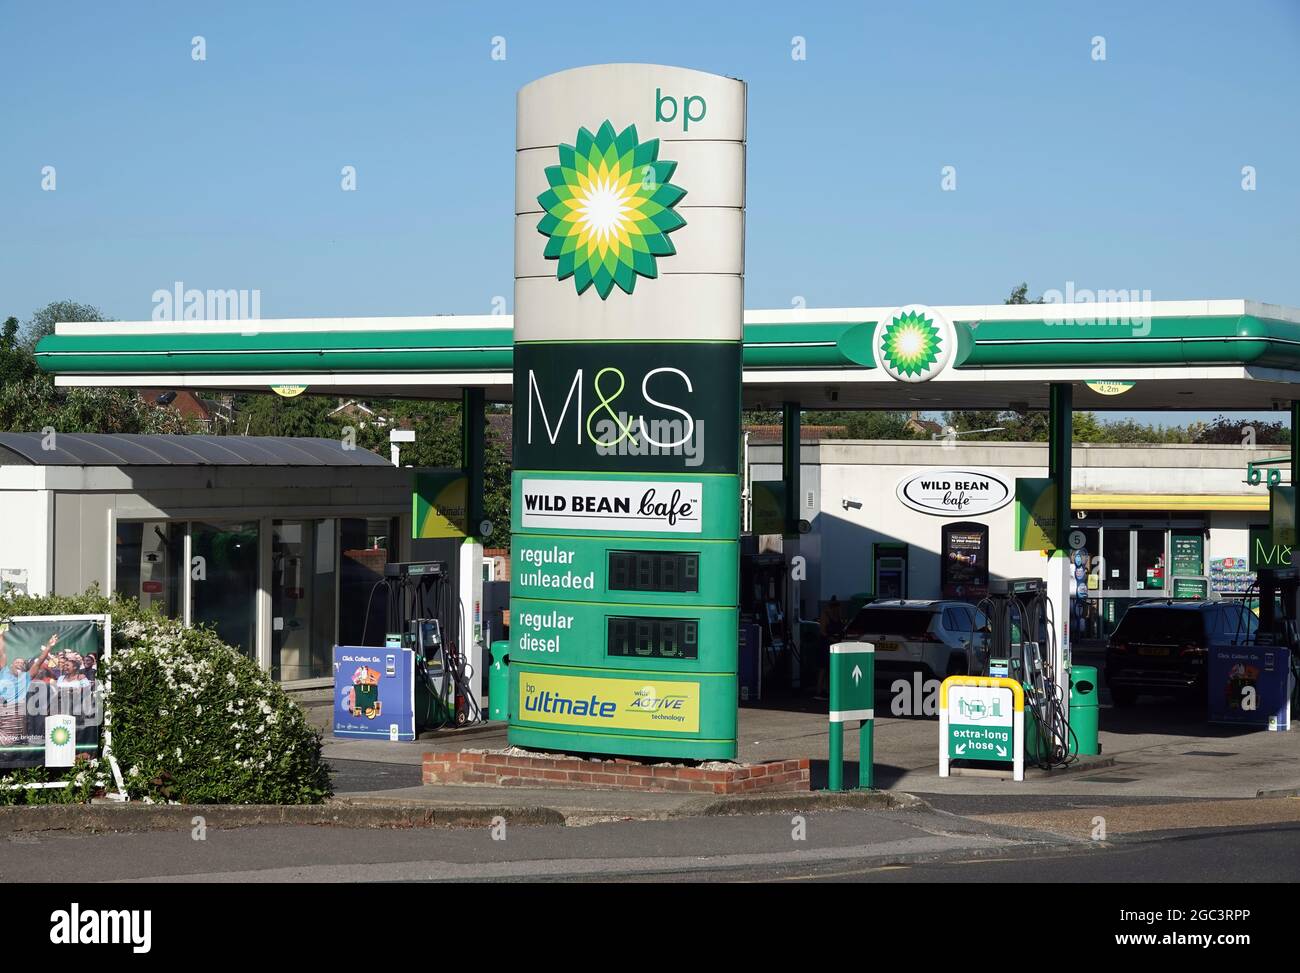 BILLERICAY, UNITED KINGDOM - Jun 13, 2021: A BP petrol station with Marks and Spencer shop and Wild Bean Cafe in Billericay, Essex, UK Stock Photo